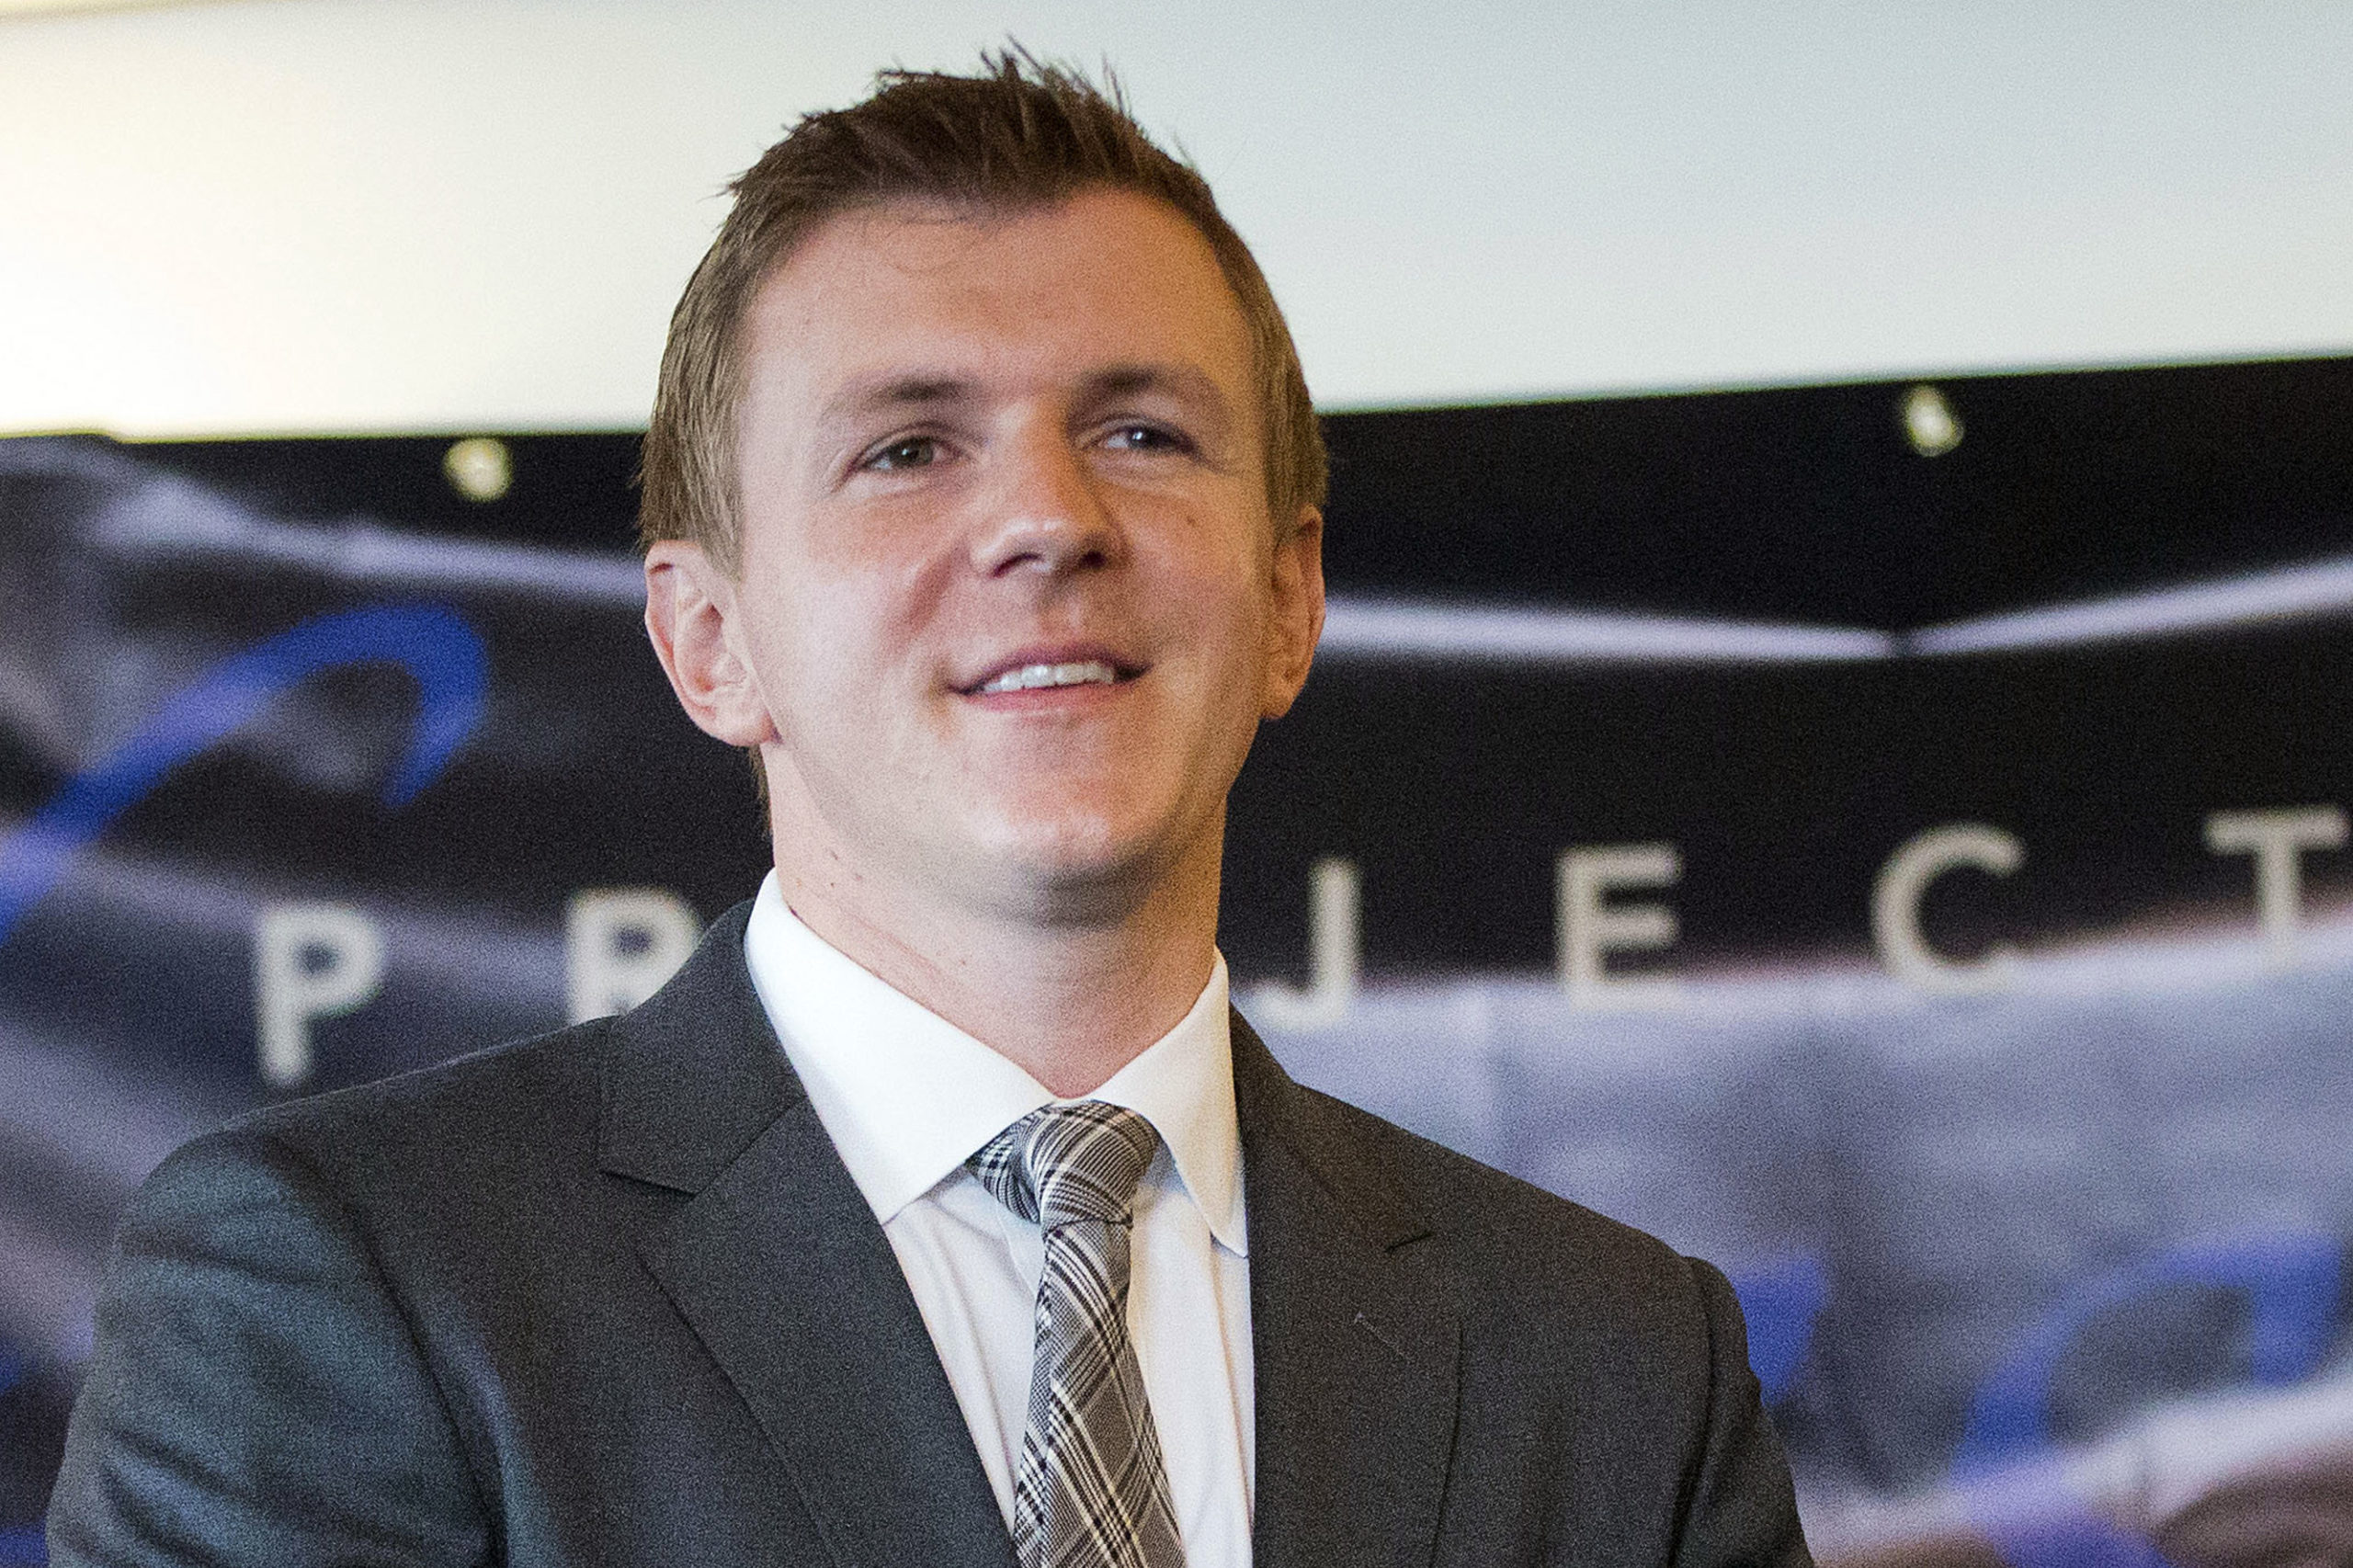 James O'Keefe, then-president of Project Veritas Action, waits to be introduced during a news conference at the National Press Club in Washington, D.C., on Sept. 1, 2015.